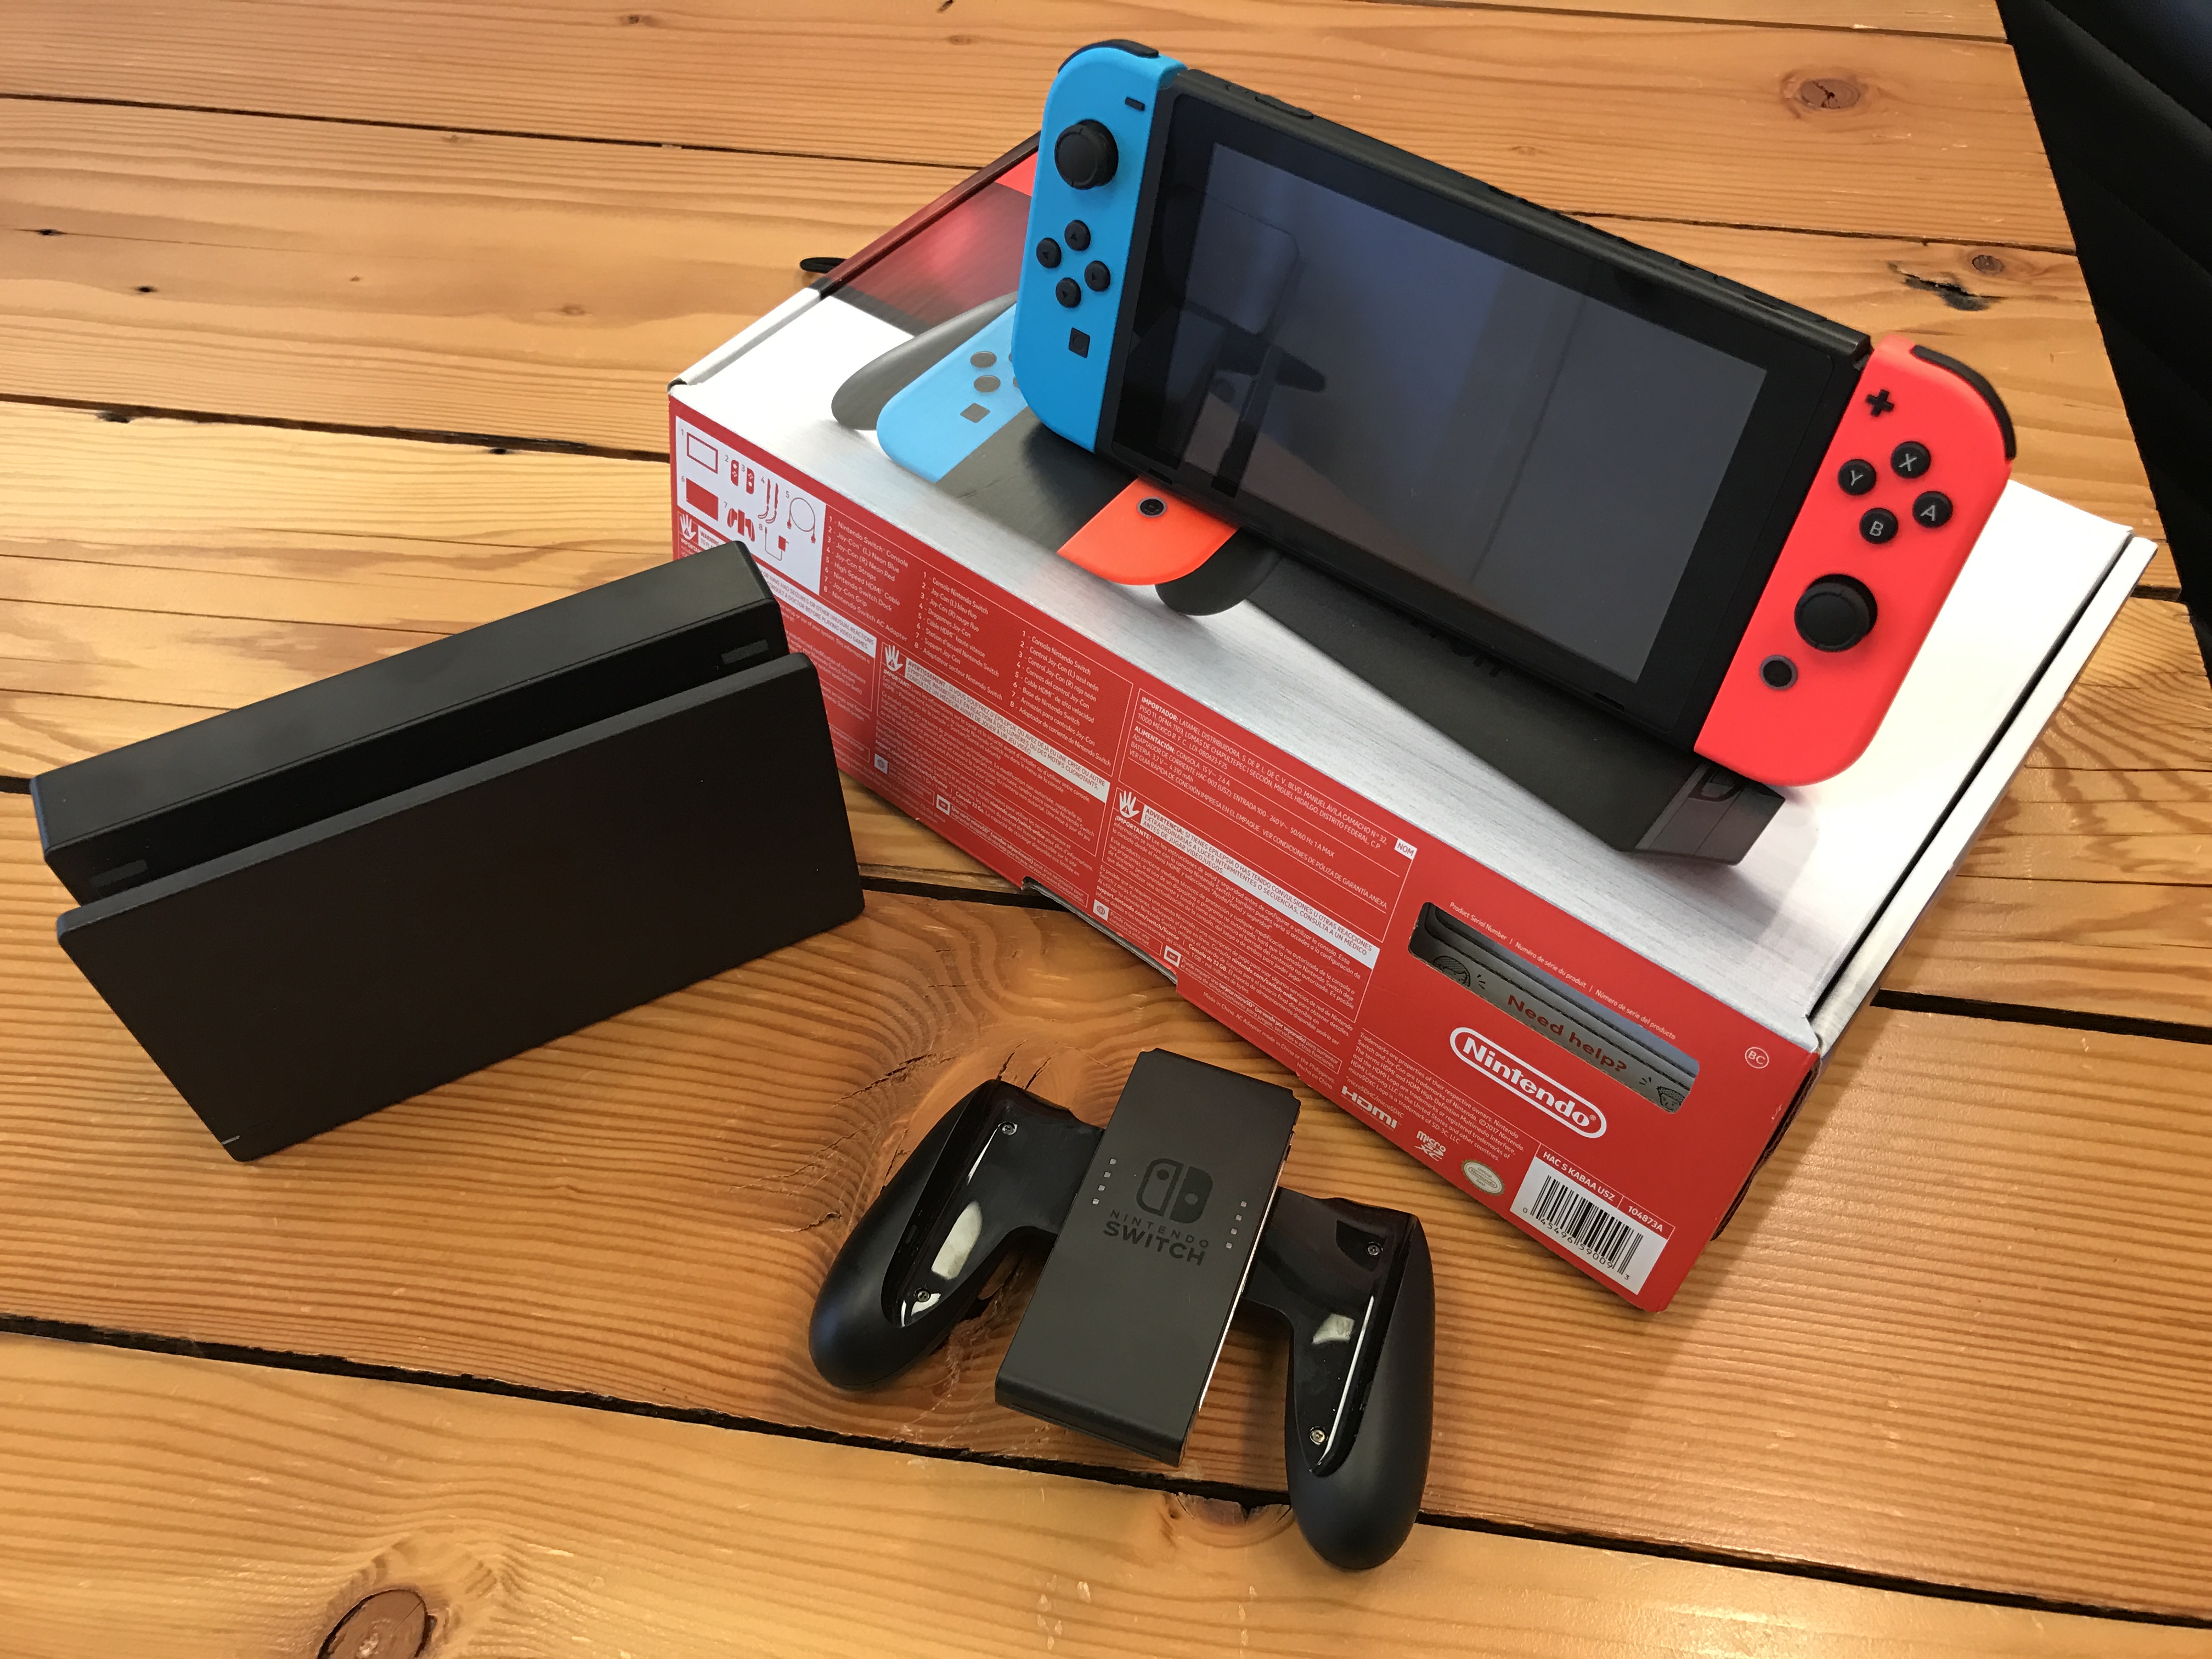 Nintendo Switch OLED model unboxing and review